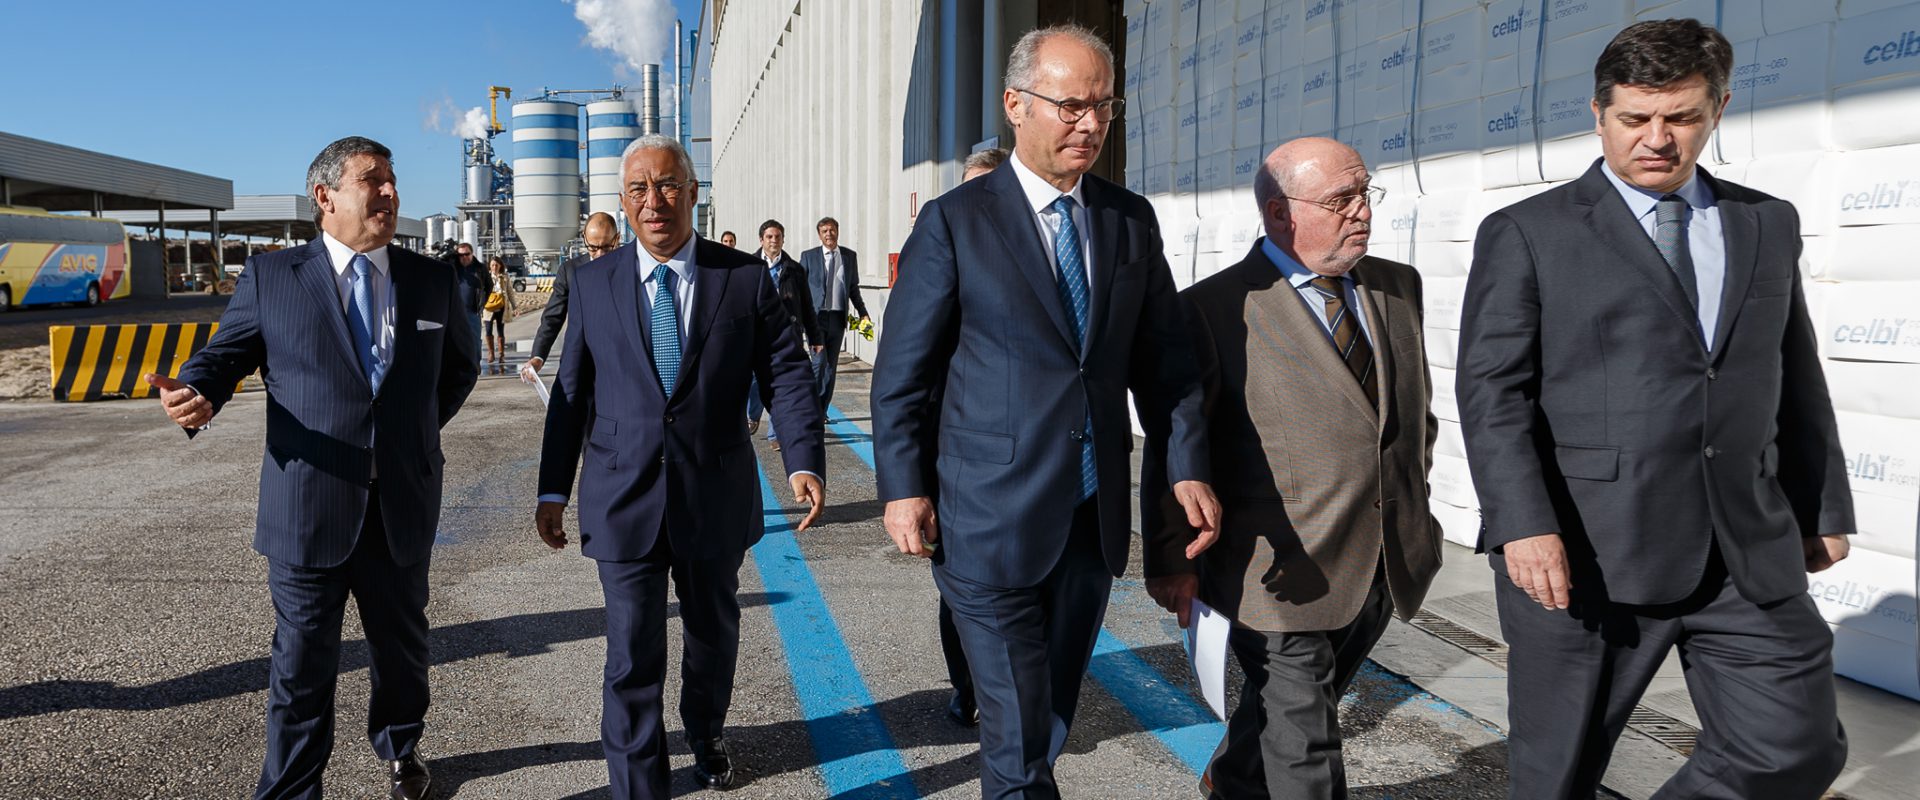 Paulo Fernandes and Borges de Oliveira, received the Prime Minister, António Costa, at the ceremony that sealed the investment agreement with the Portuguese state